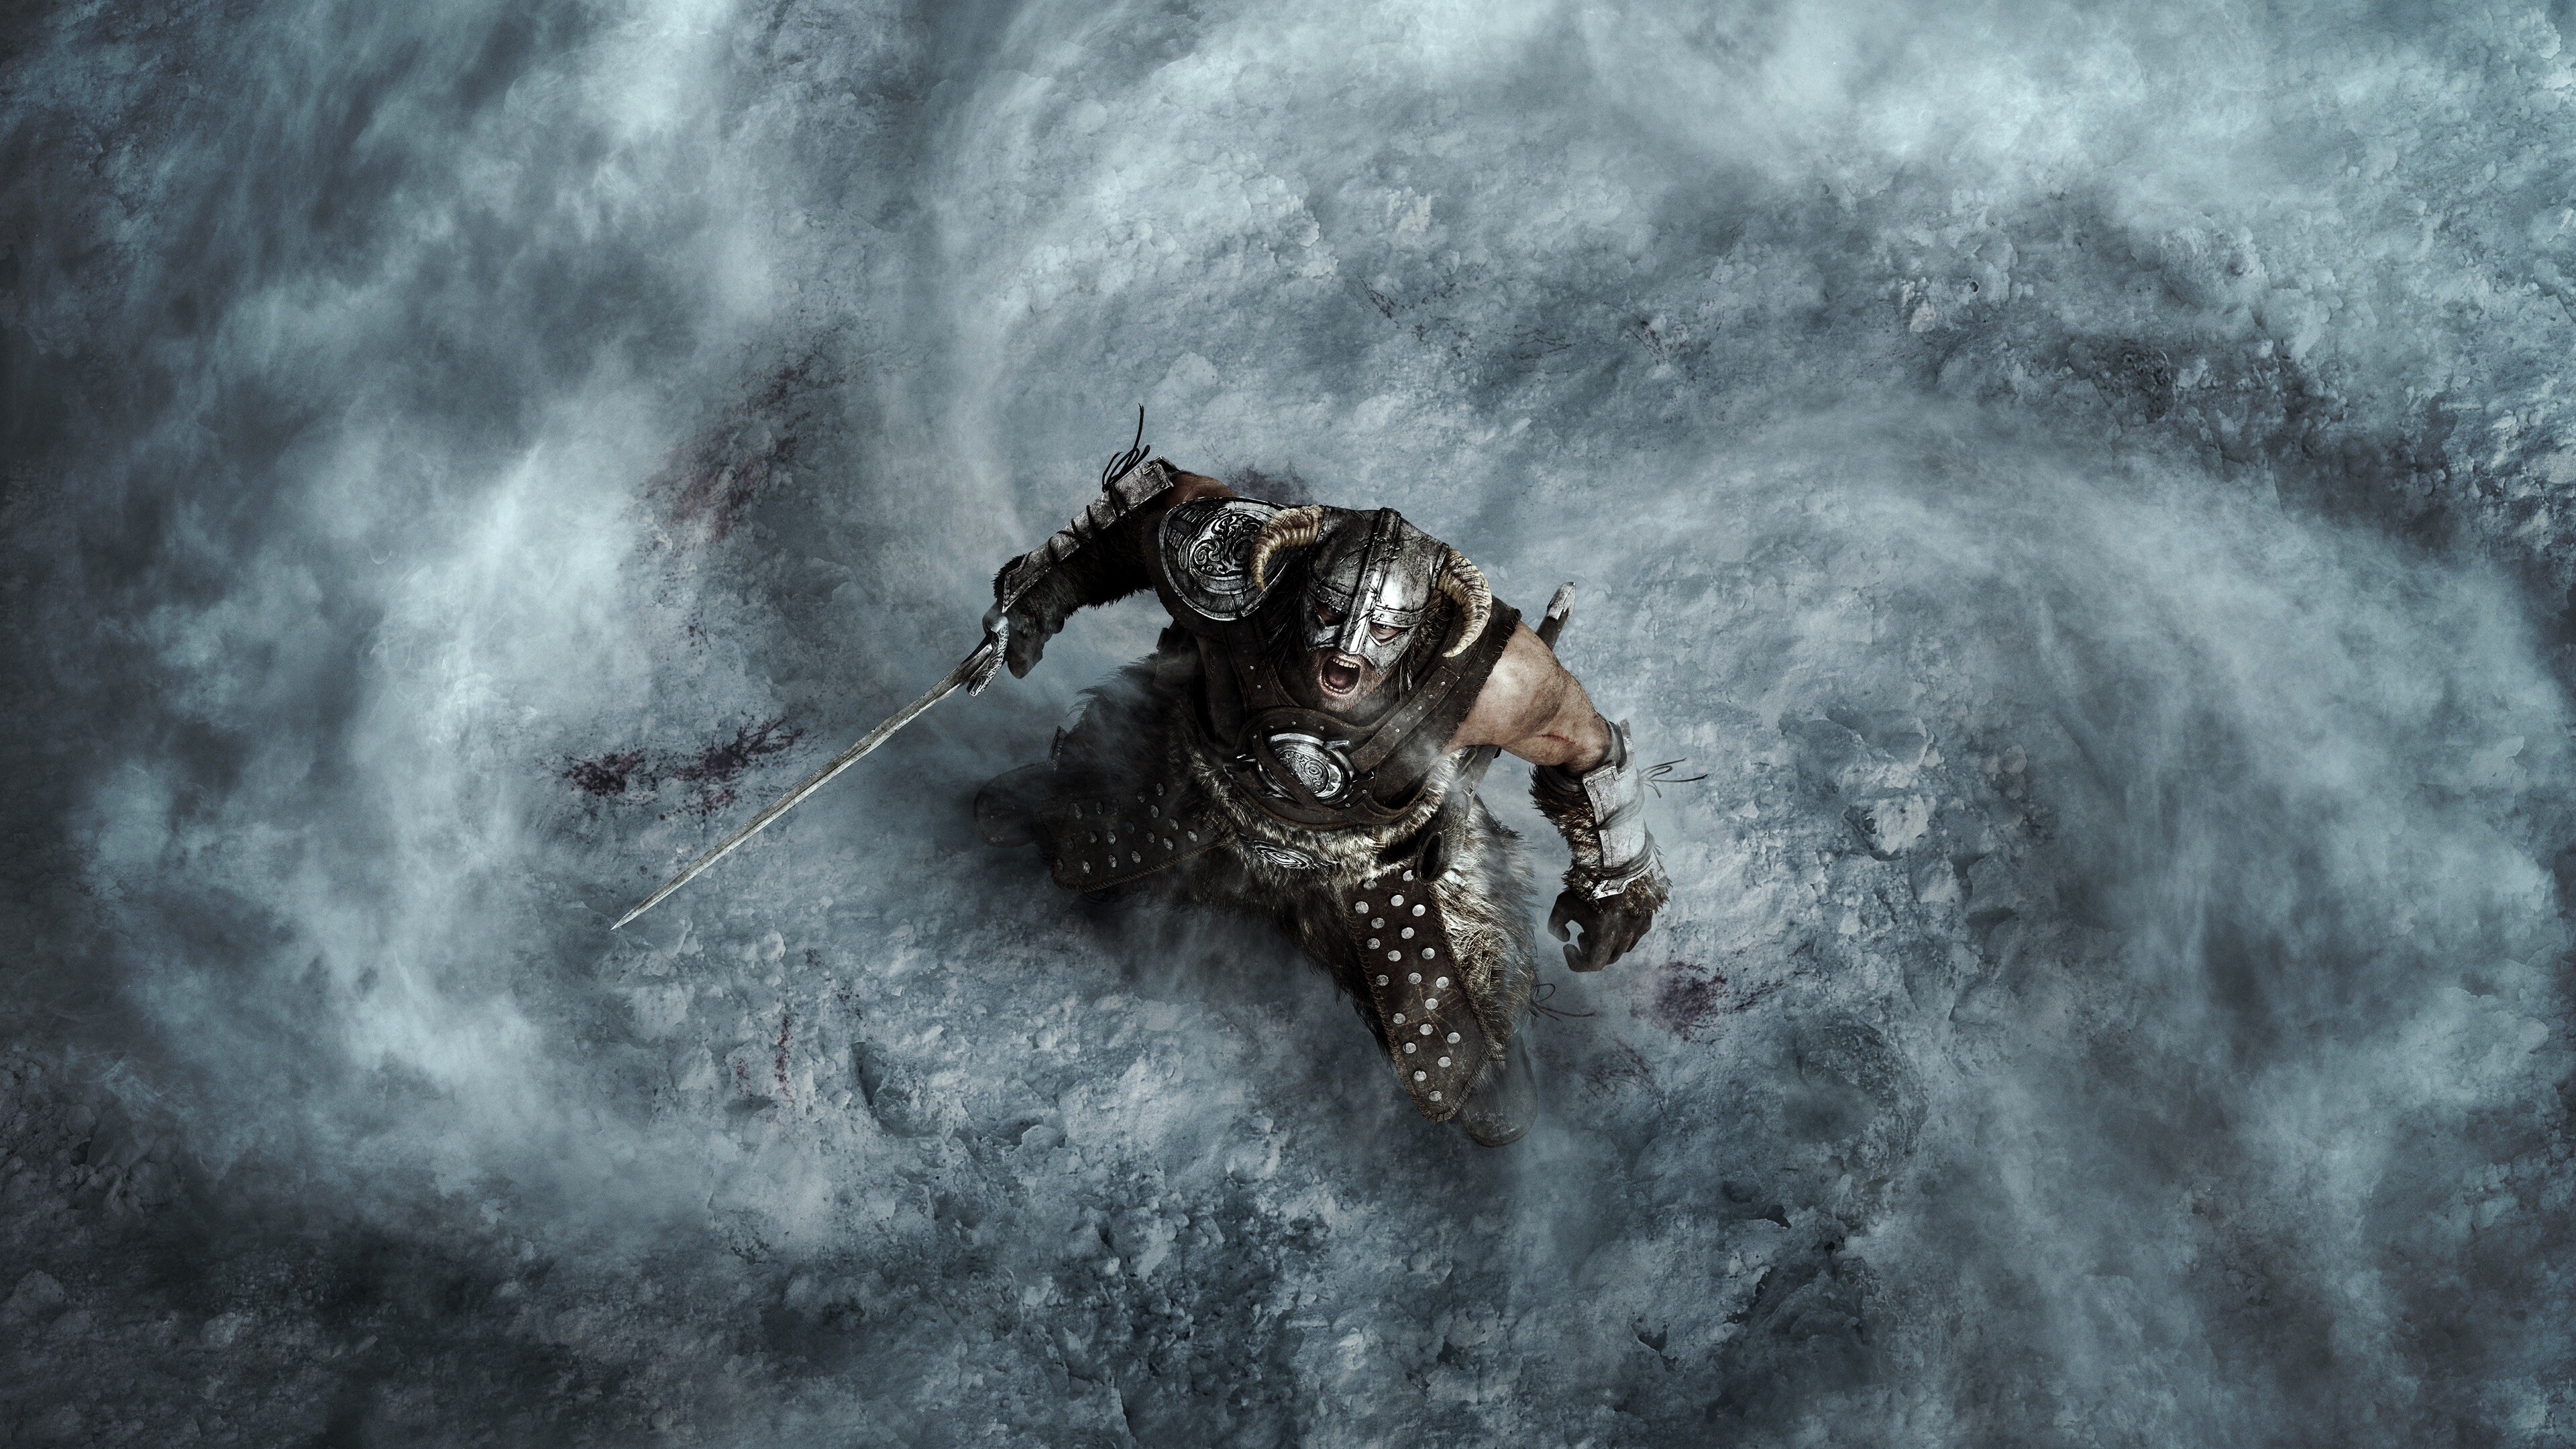 Skyrim: Released worldwide for Microsoft Windows, PlayStation 3, and Xbox 360 on November 11, 2011. 3840x2160 4K Background.